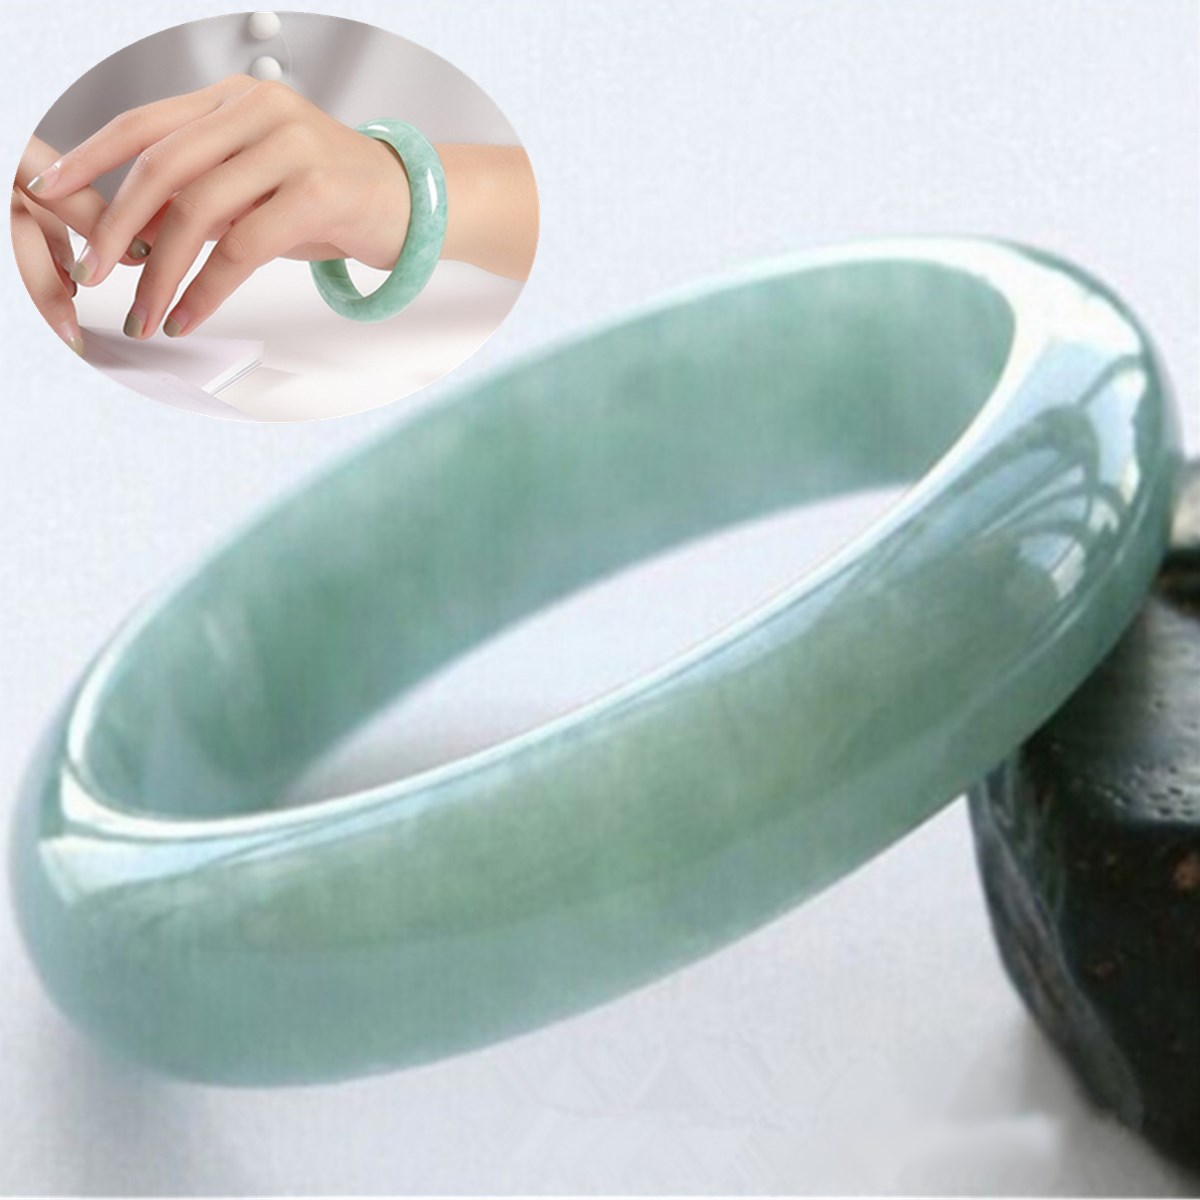 Beautiful light spinach Jade bangle bracelet imported from China excellent condition